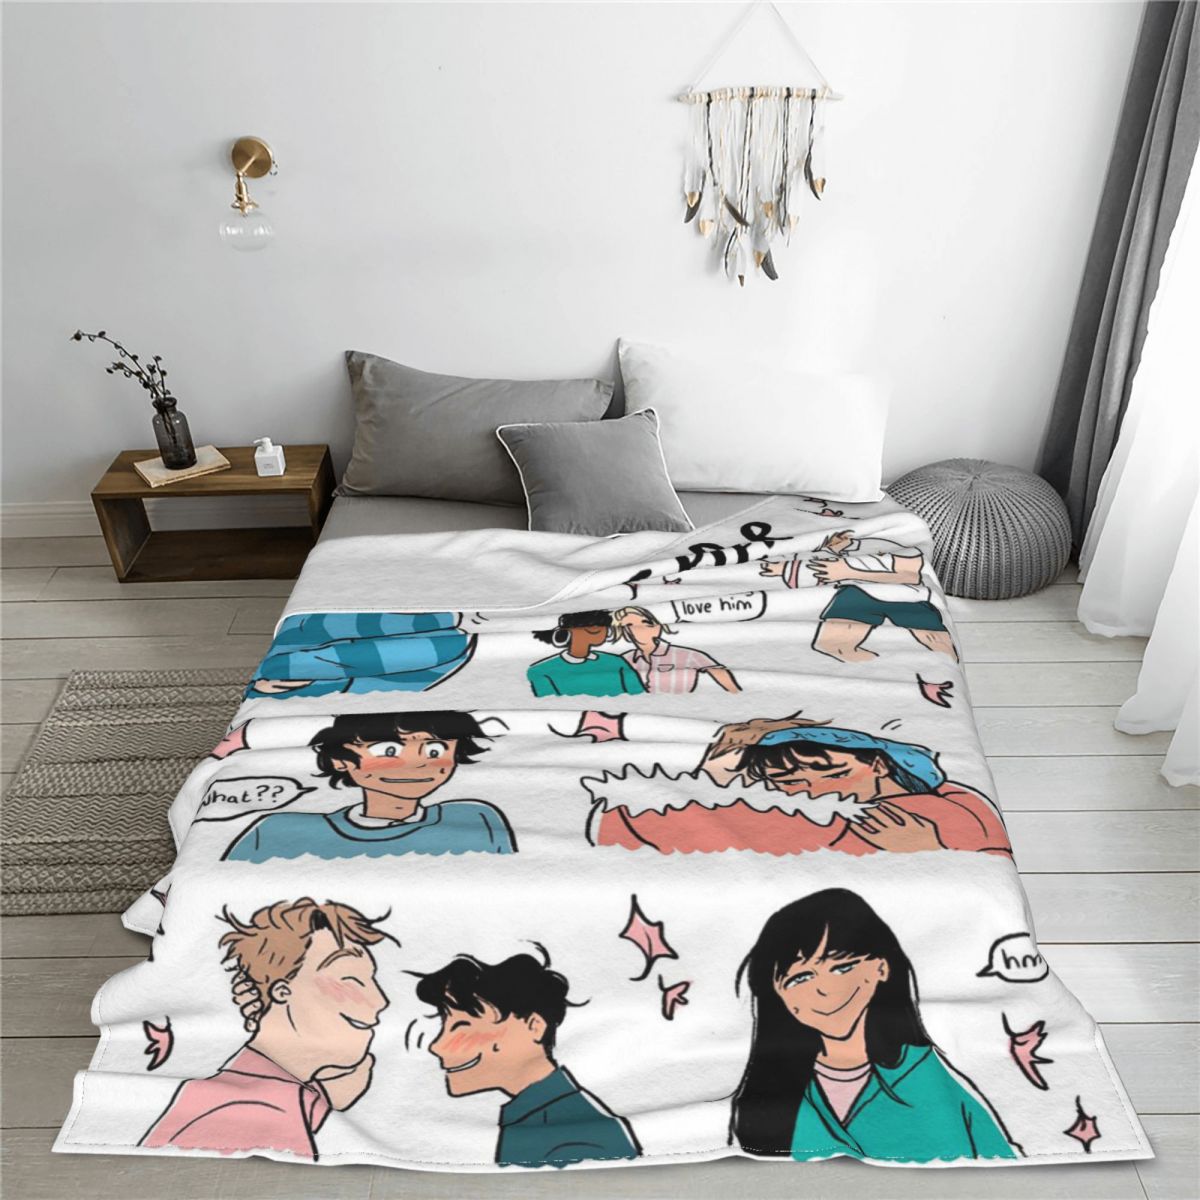 Heartstopper Romance Fleece Throw Blankets Anime Lgbt Yaoi Boy Love Blankets for Bed Couch Warm Plush Thin Quilt